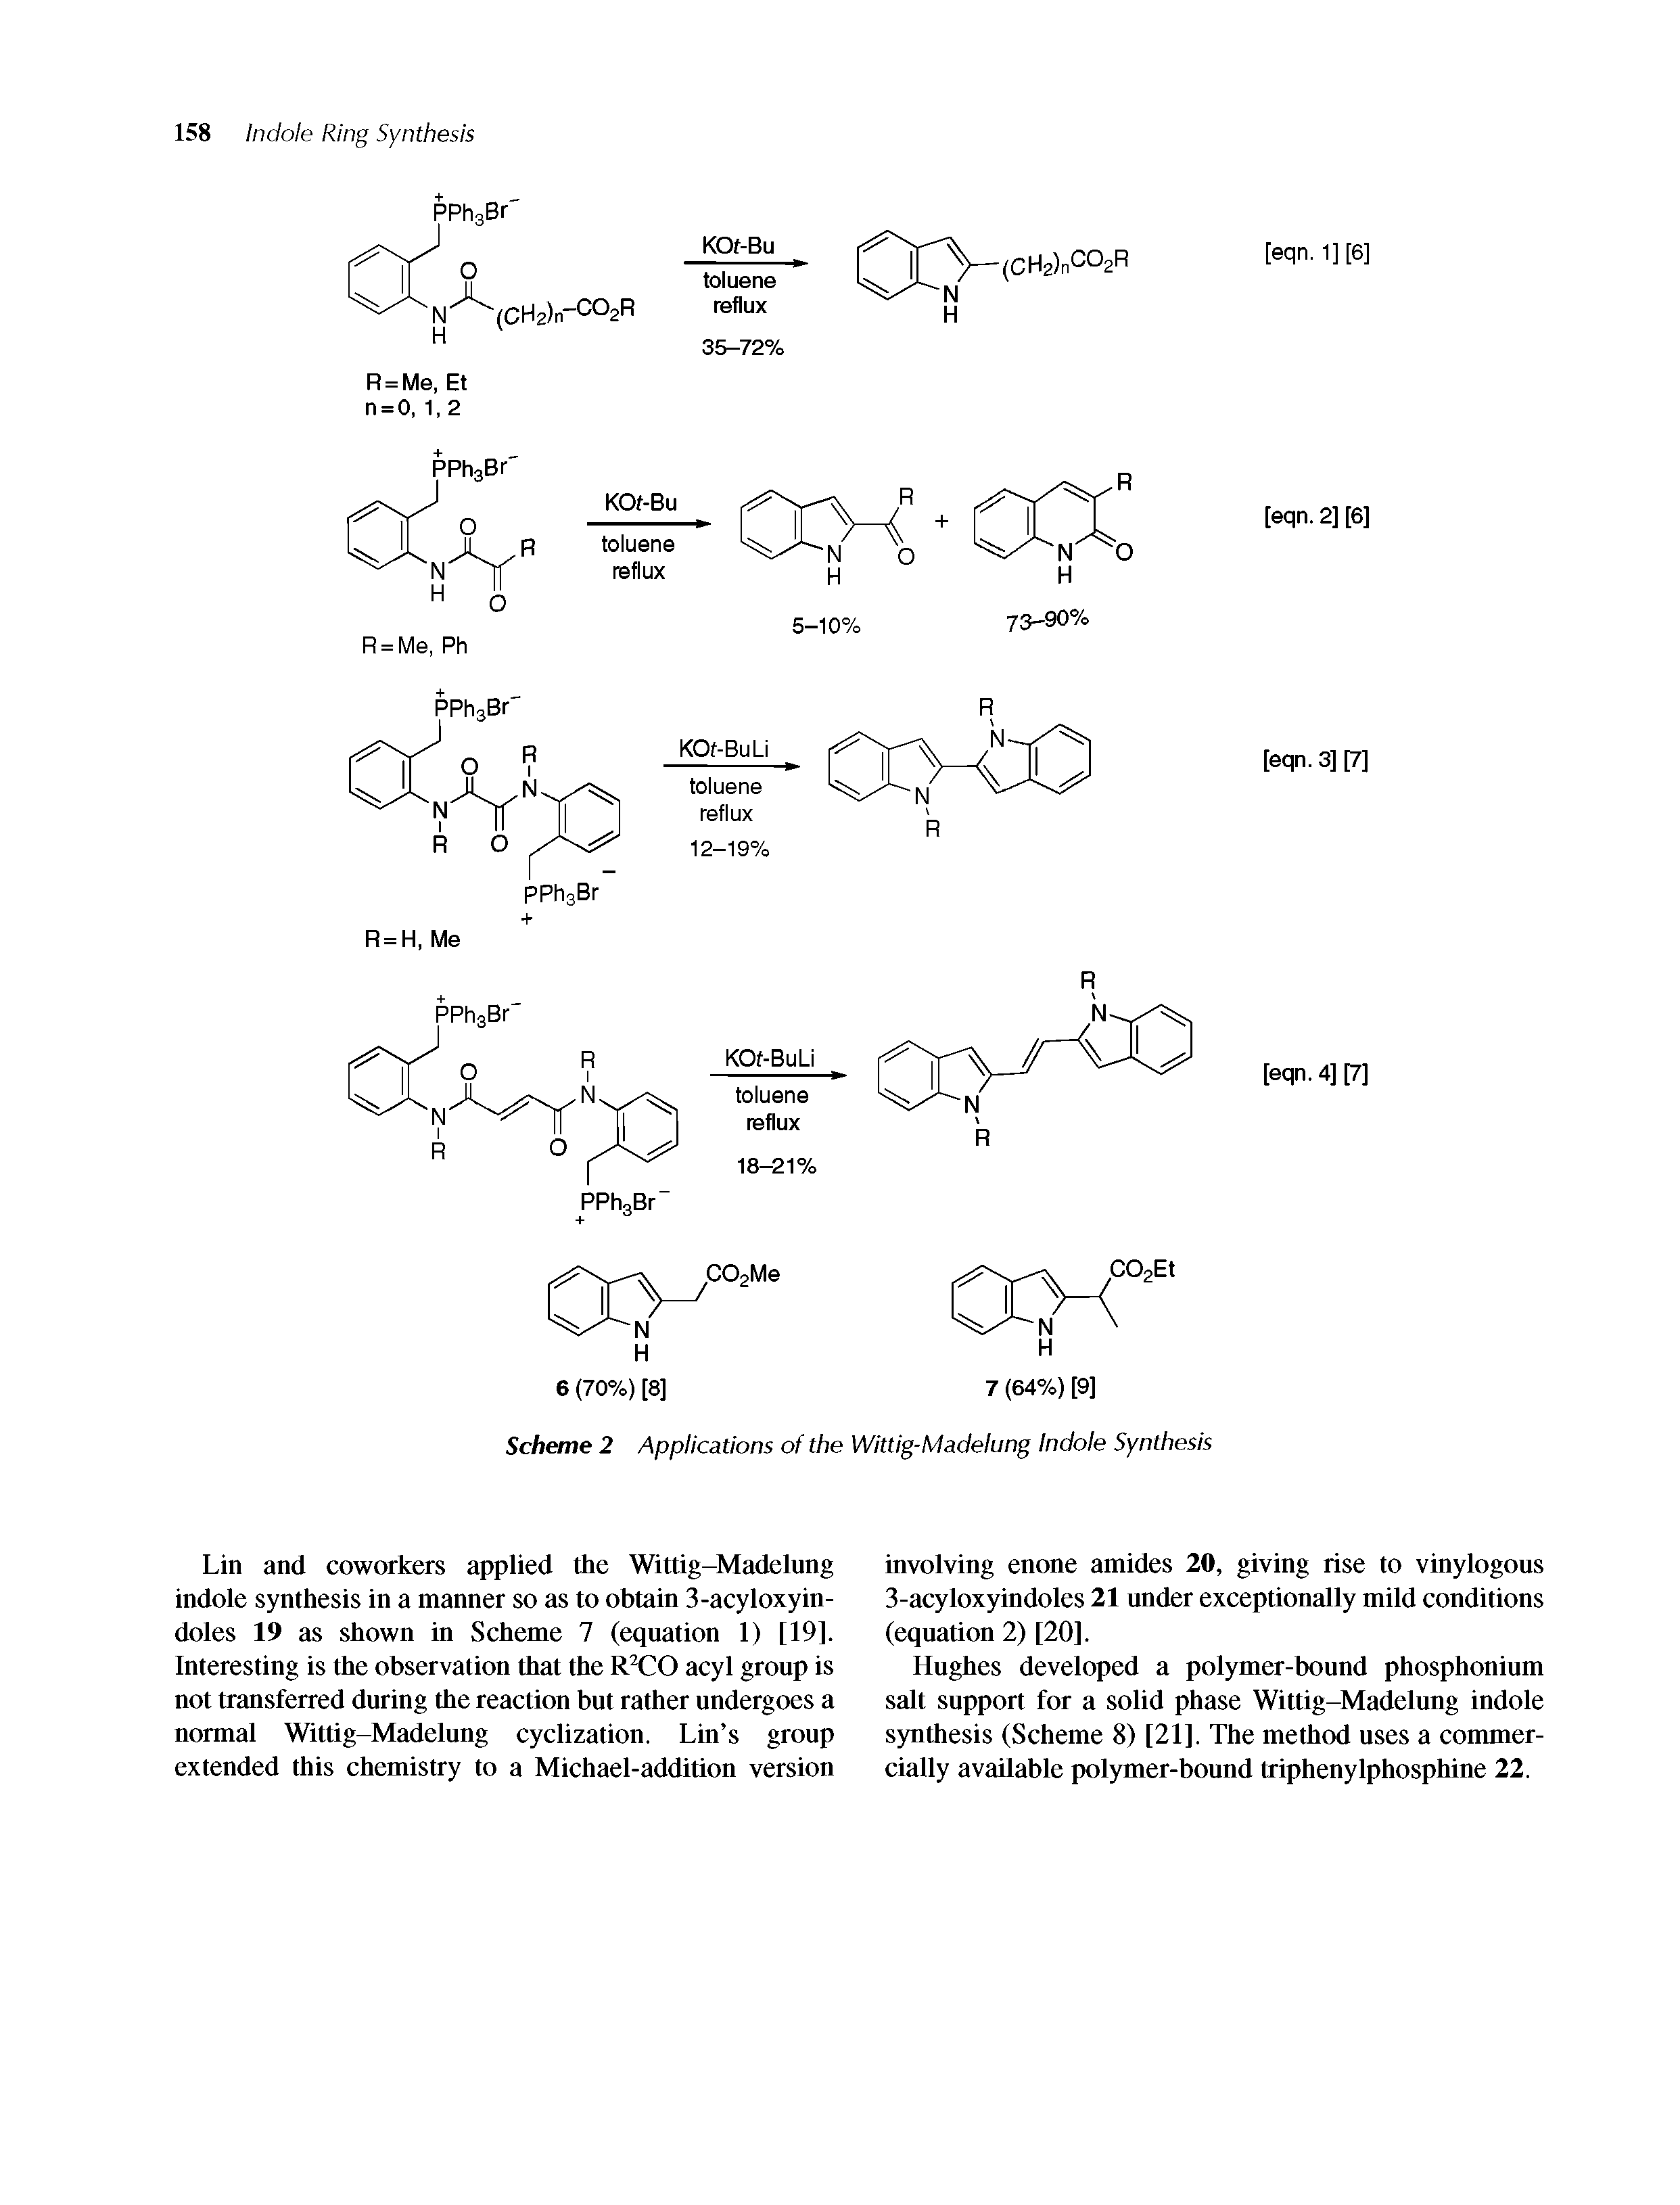 Scheme 2 Applications of the Wittig-Madelung Indole Synthesis...